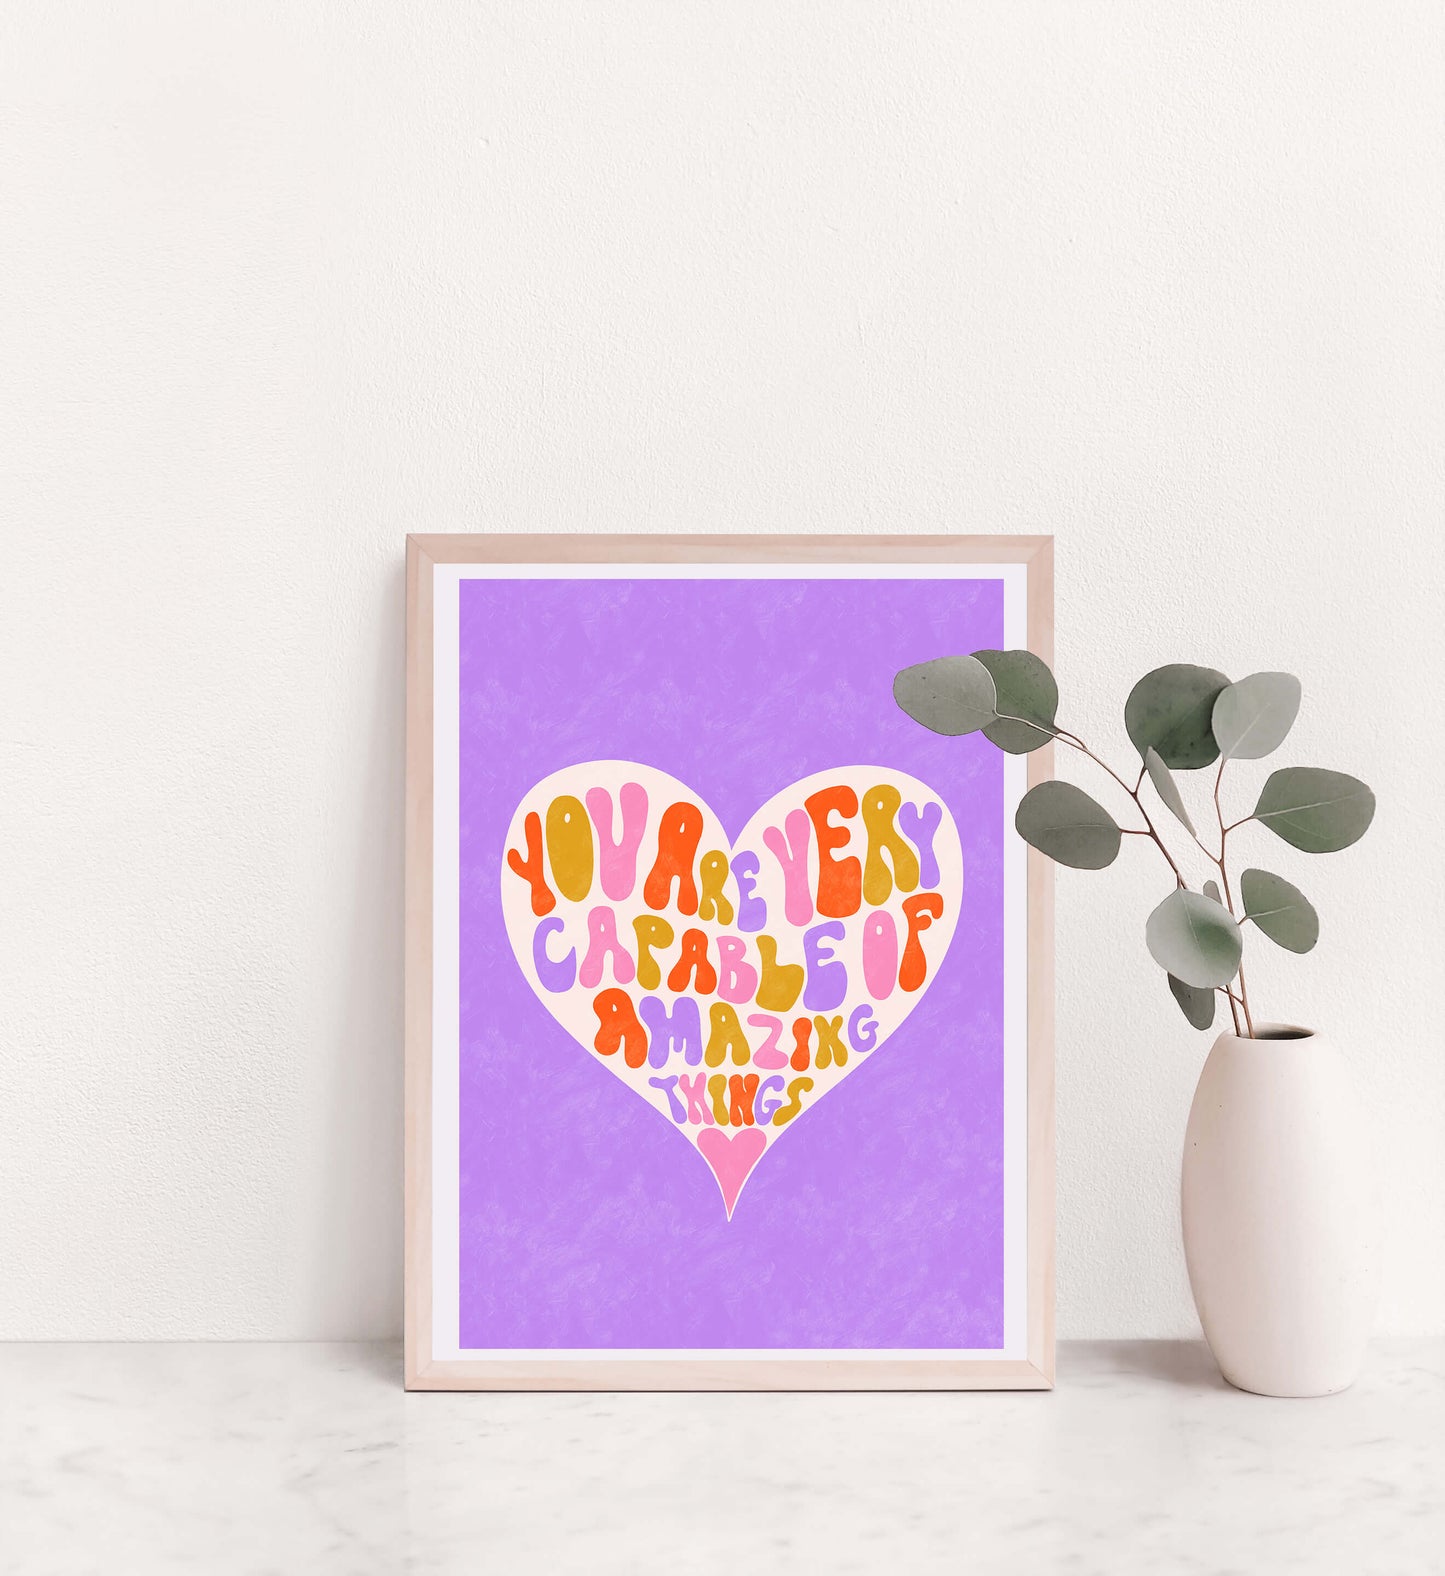 You Are Very Capable of Amazing Things - Positive Art Print